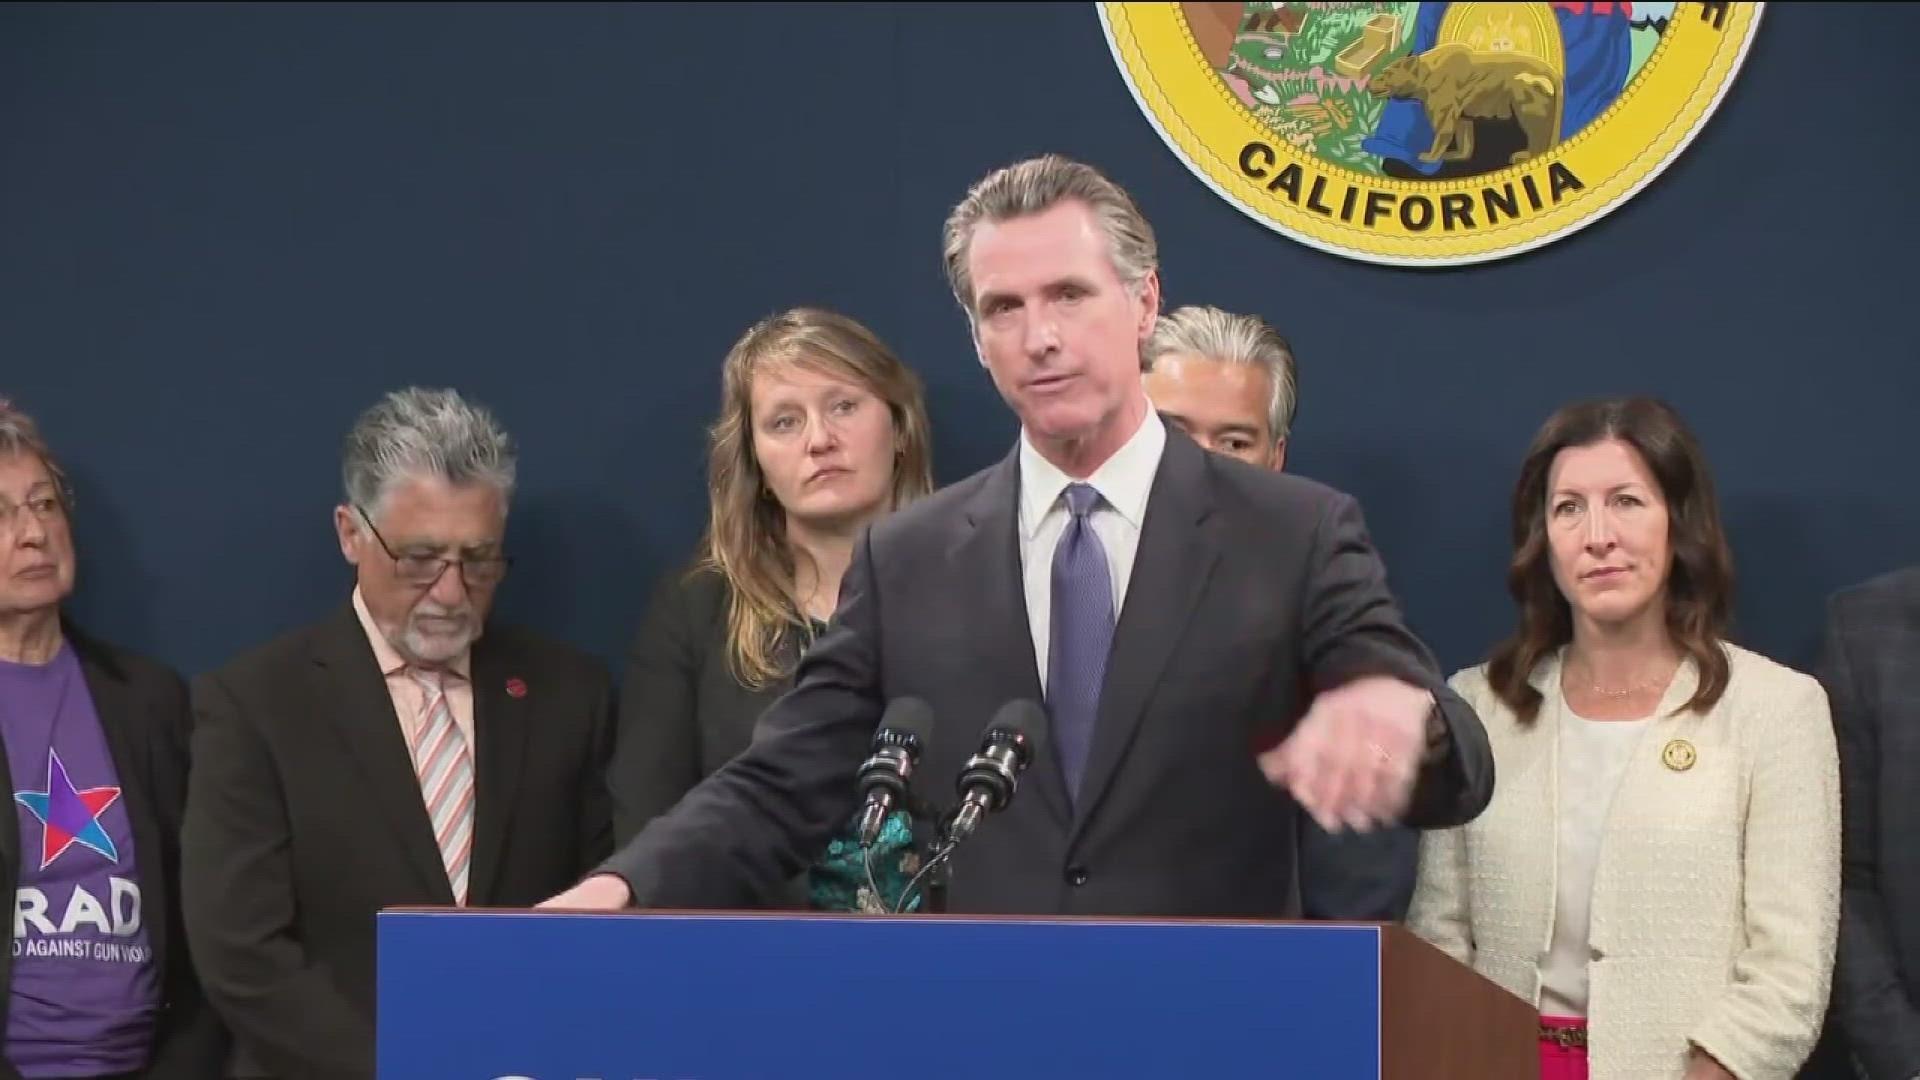 The announcement comes after mass shootings in Monterey Park, Half Moon Bay and Oakland in recent weeks.